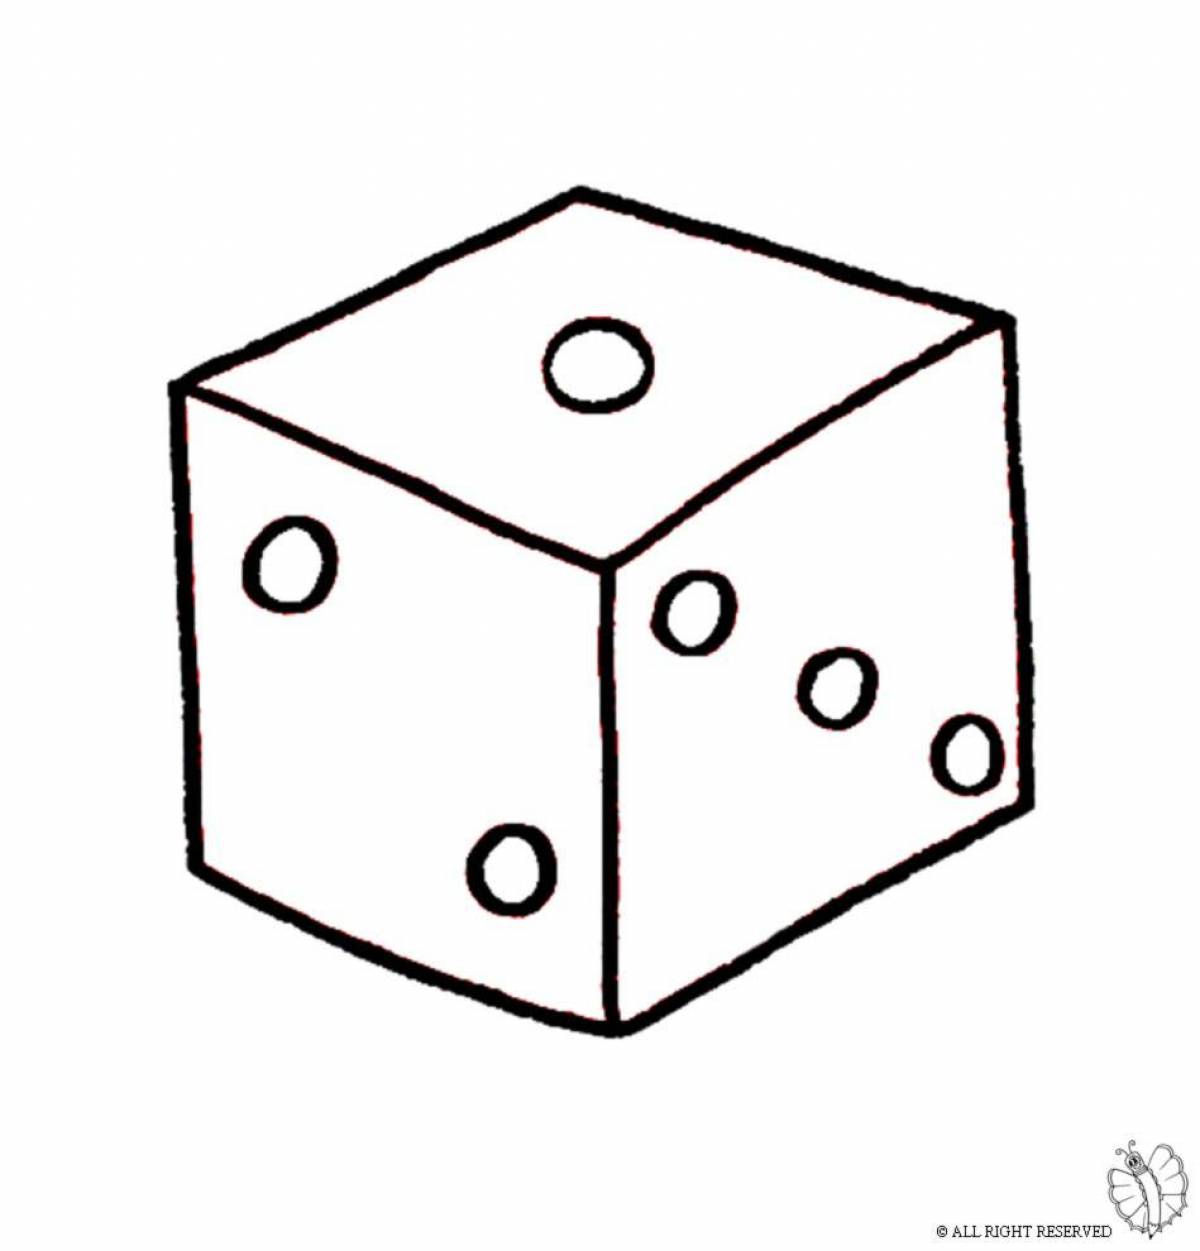 A coloring page for fun cubes